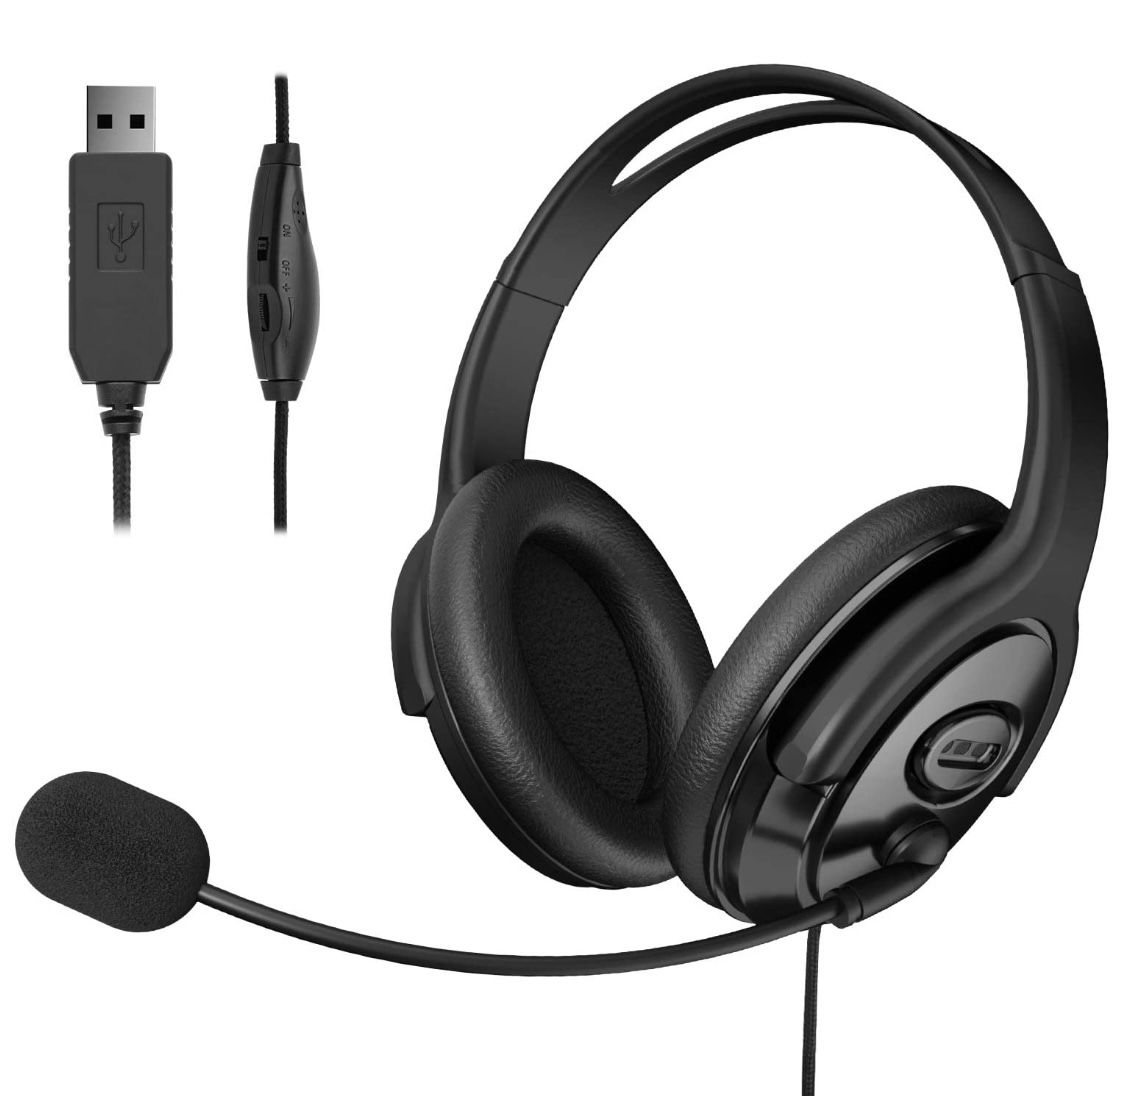 NEW! USB Headset Computer Headphone with Microphone Noise Cancelling, Lightweight PC Headset Wired Headphones, Comfort-fit Office Headset for Skype, W